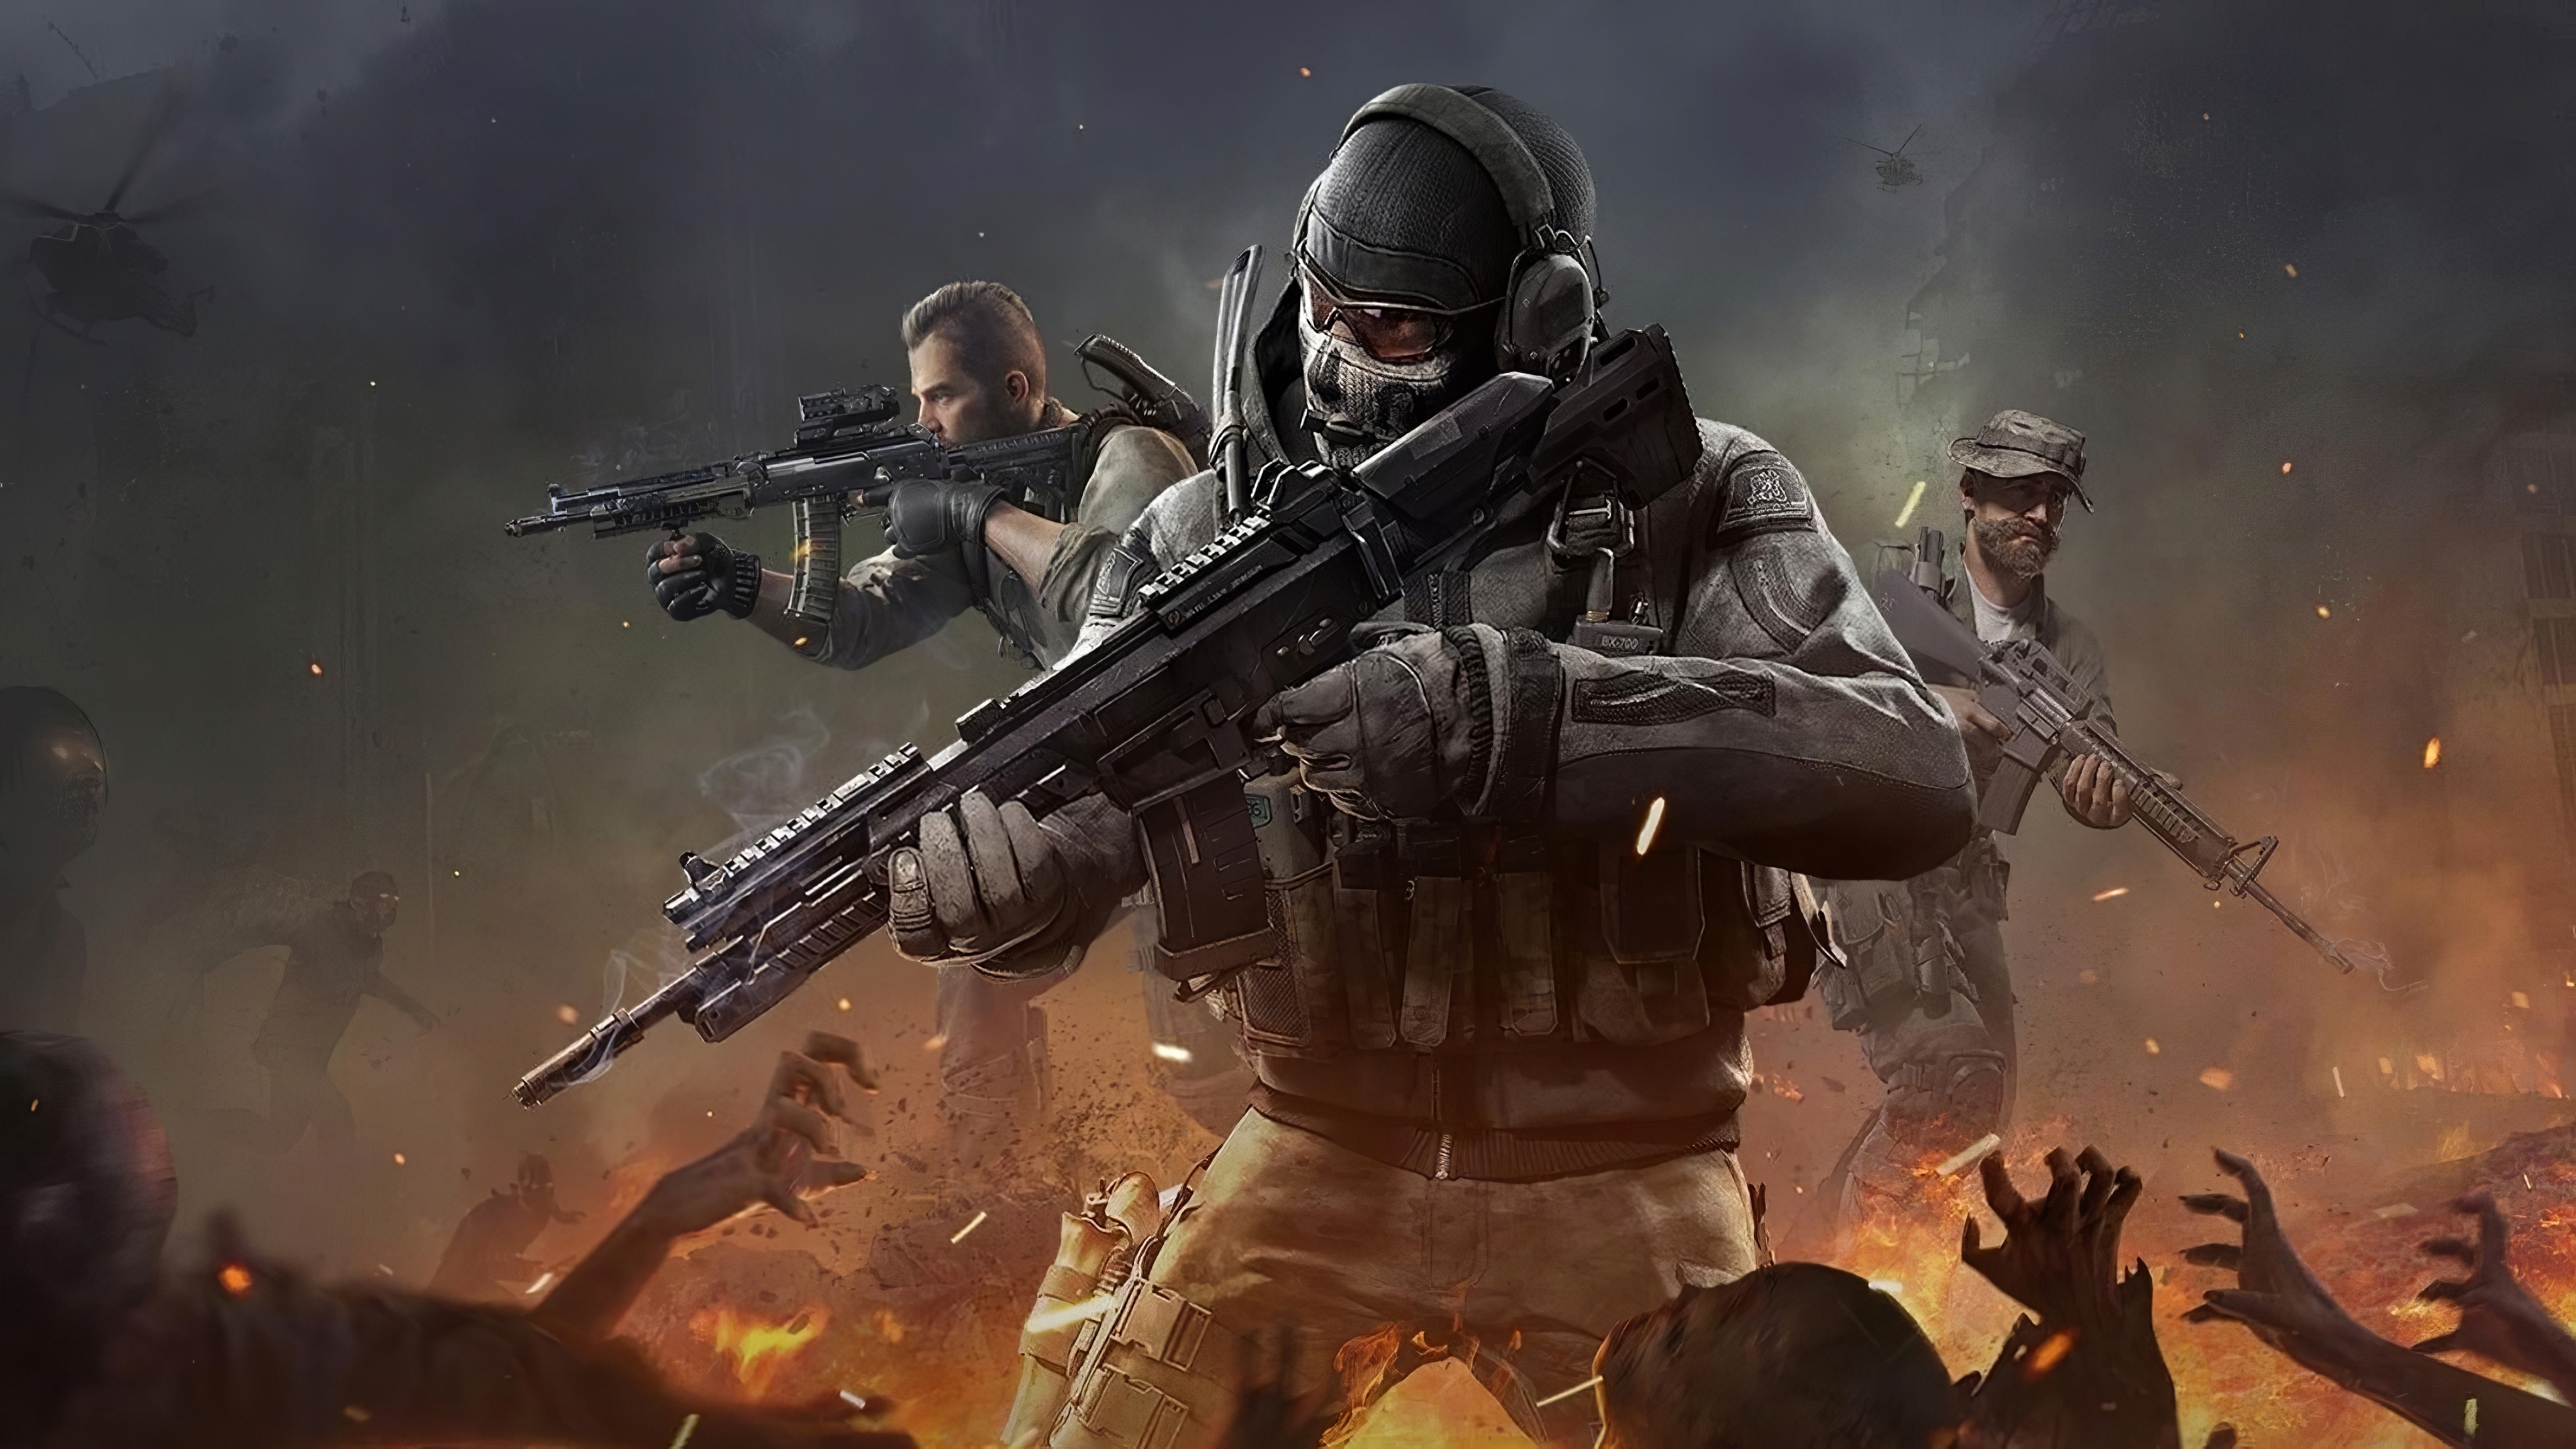 download warzone 3 for free